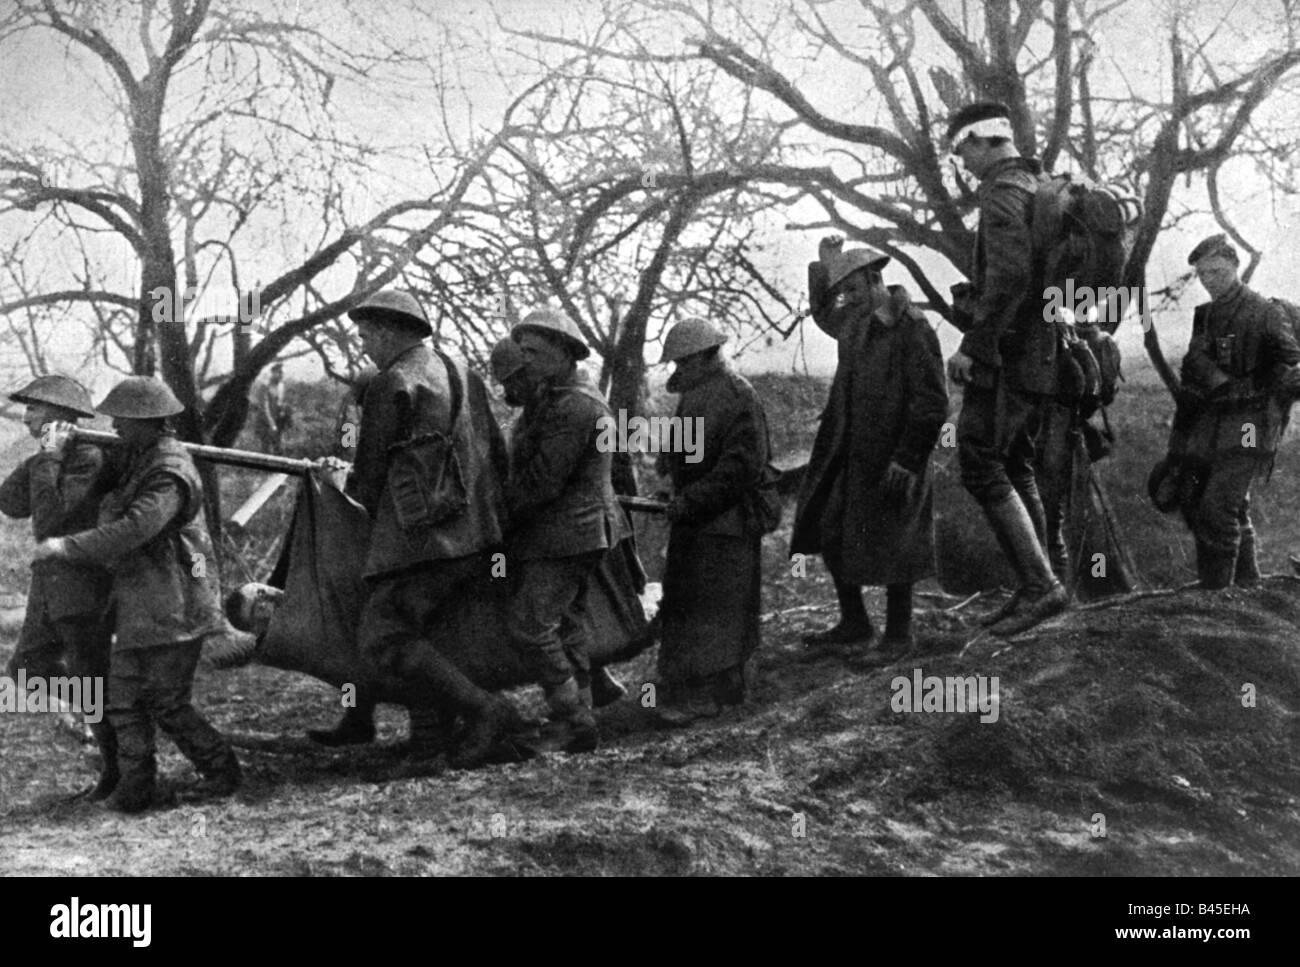 events, First World War / WWI, Western Front, German spring offensive 1918, captured British soldiers carrying wounded comrade, near St. Quentin, France, April 1918, Stock Photo